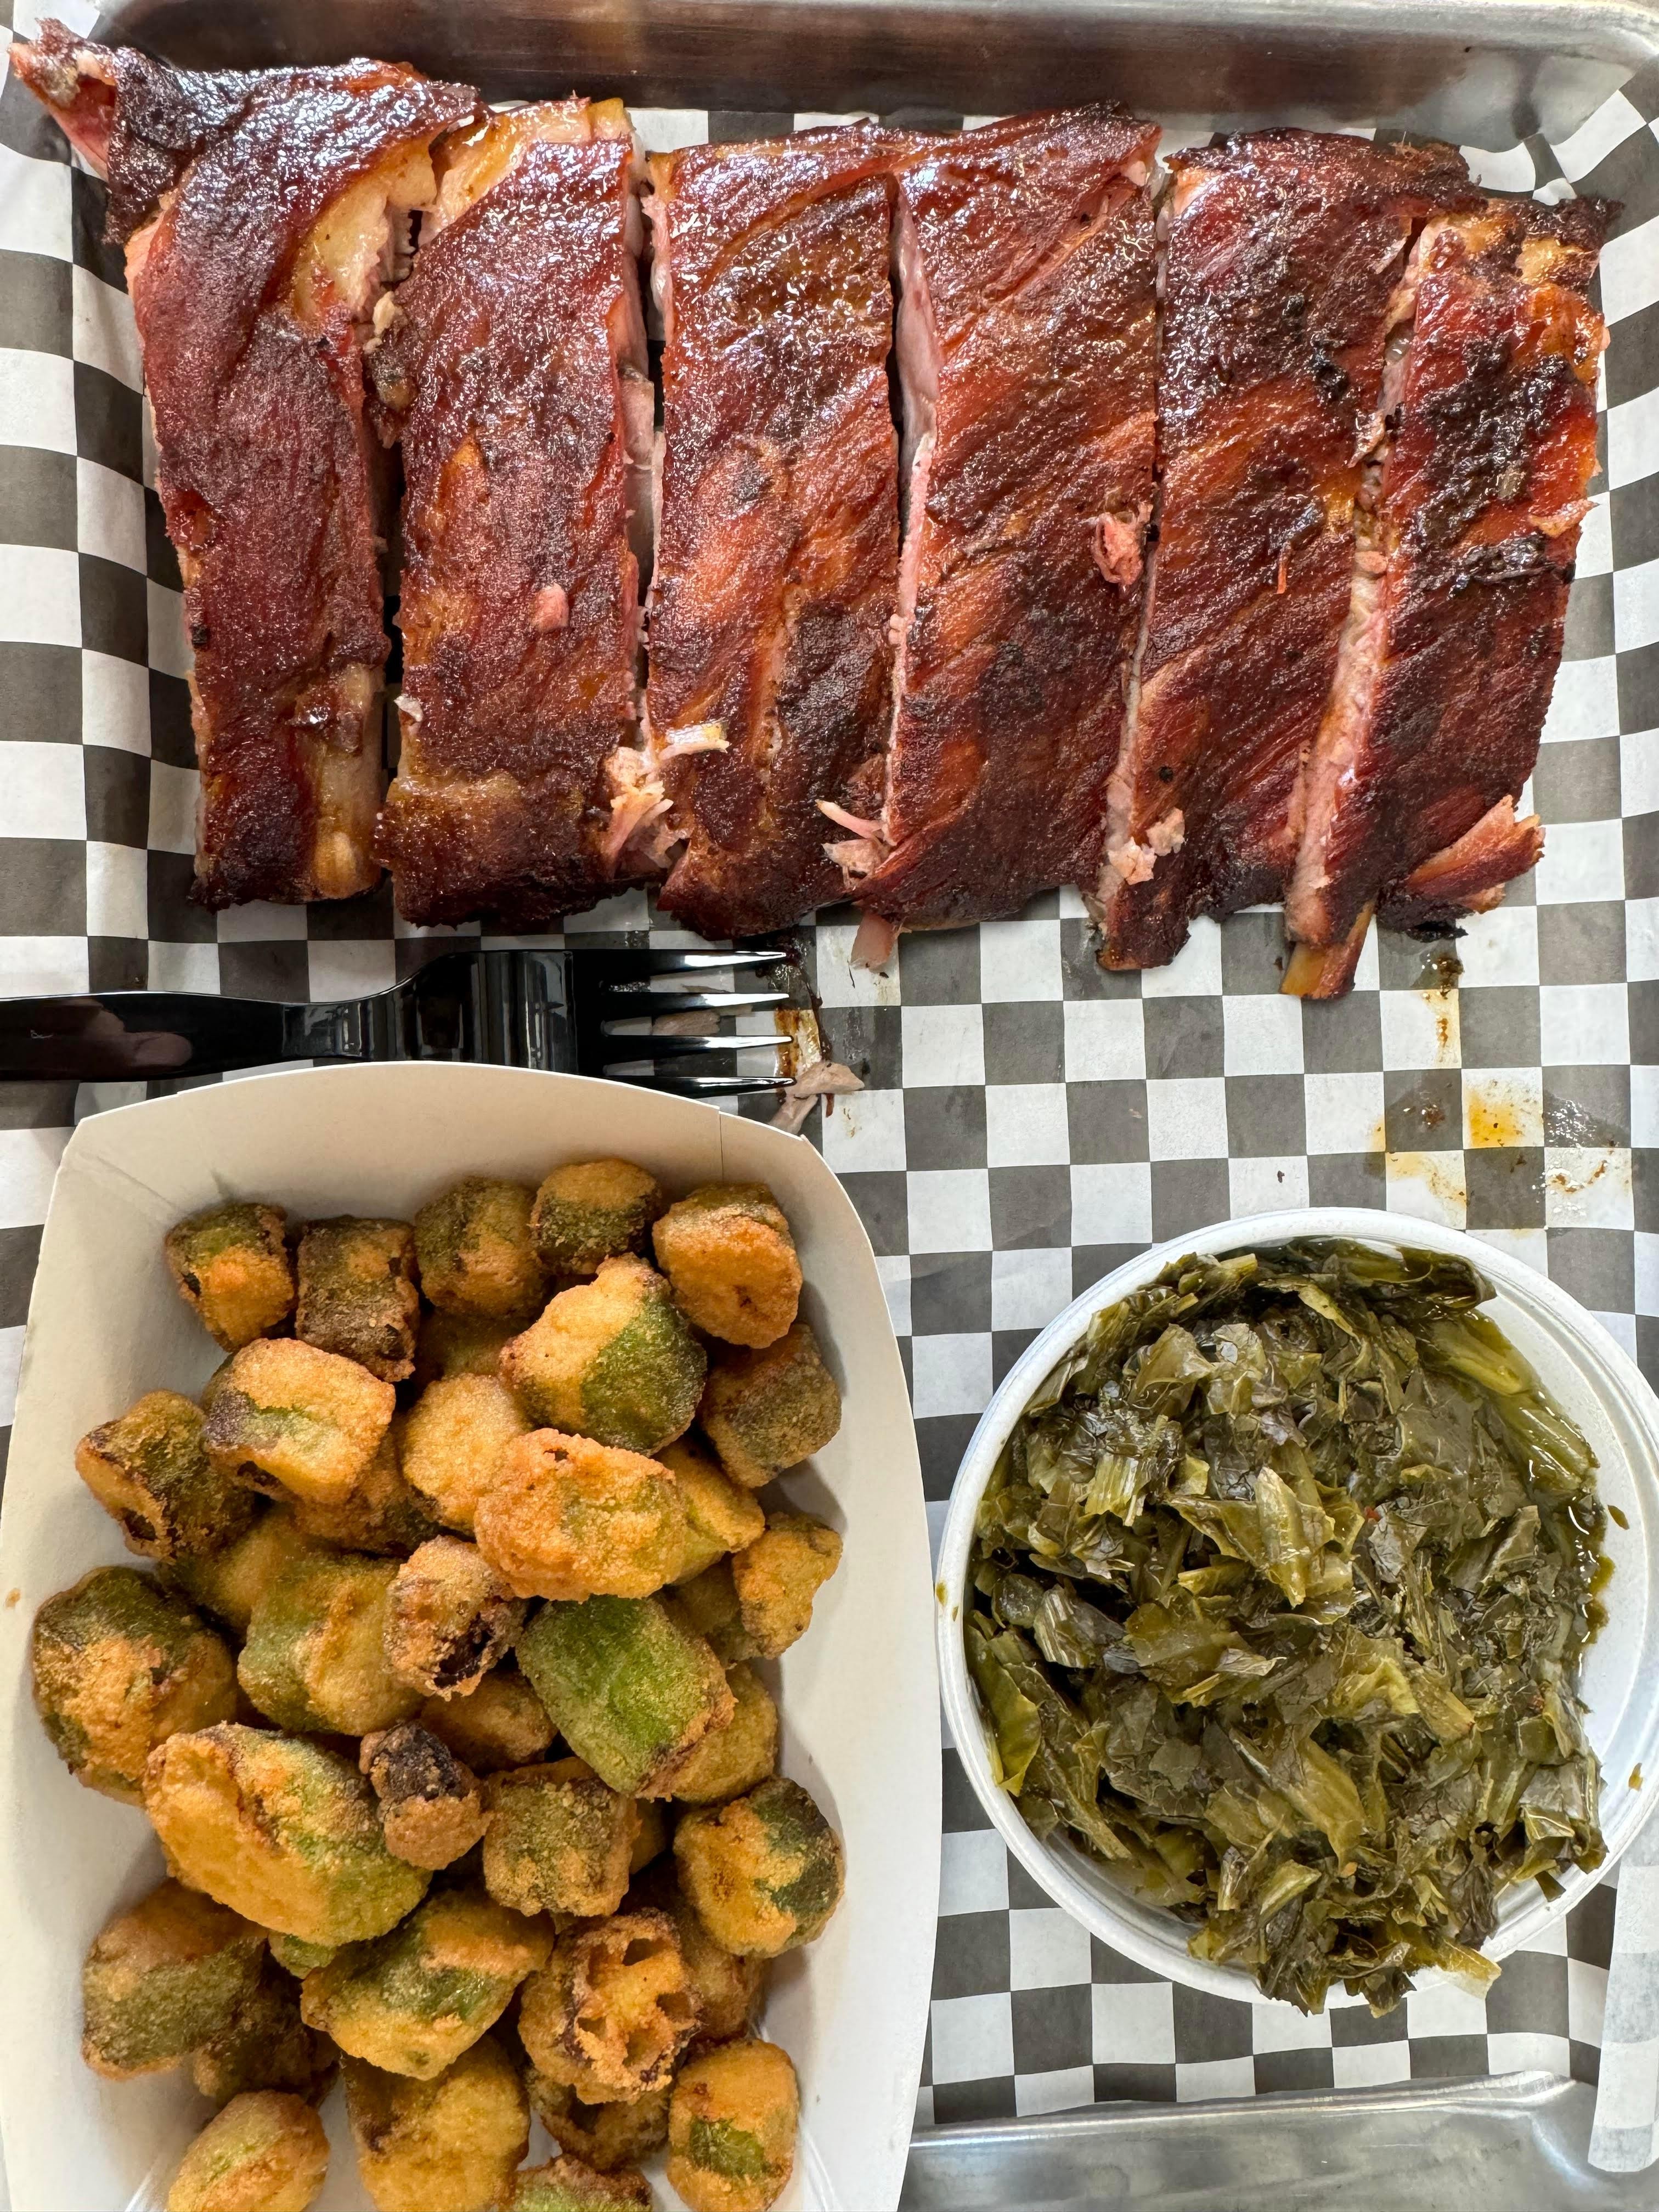 St. Louis Ribs Plate (2 sides)